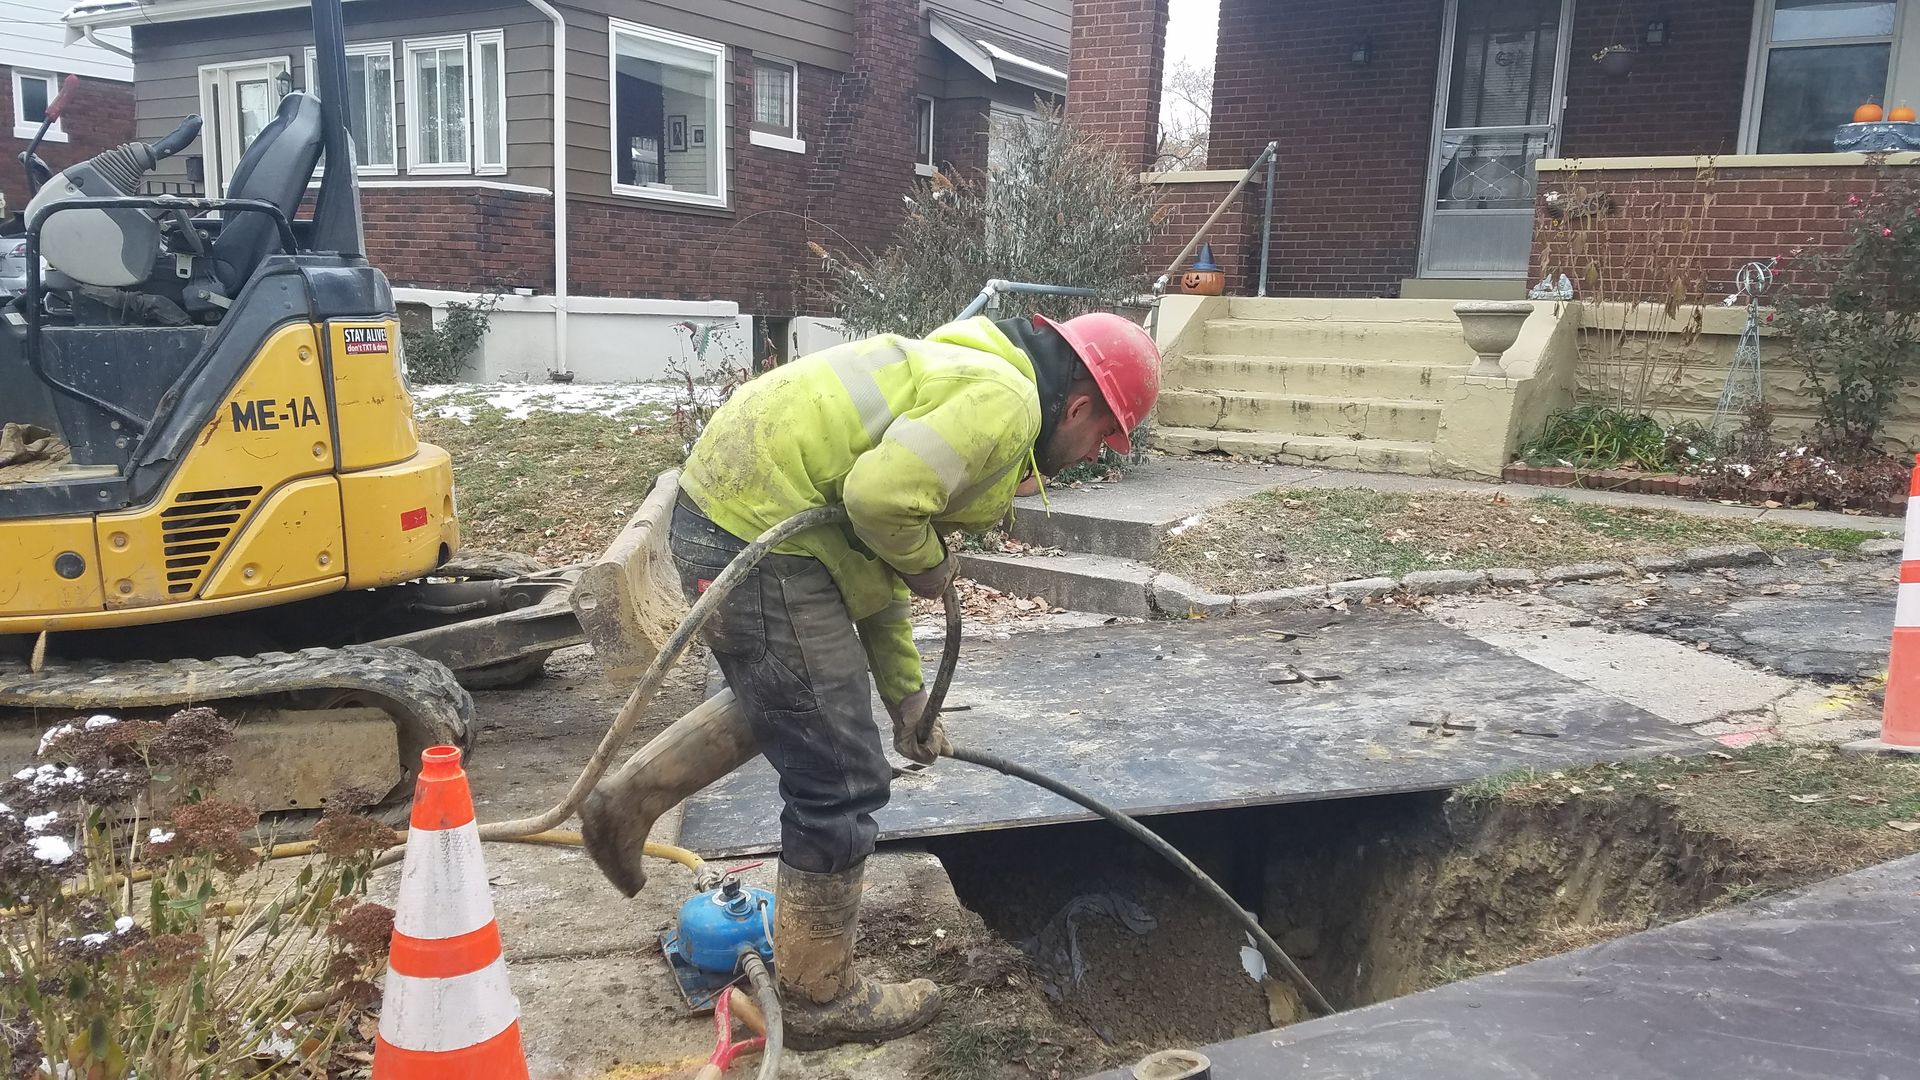 Guy removing pipe from the ground.